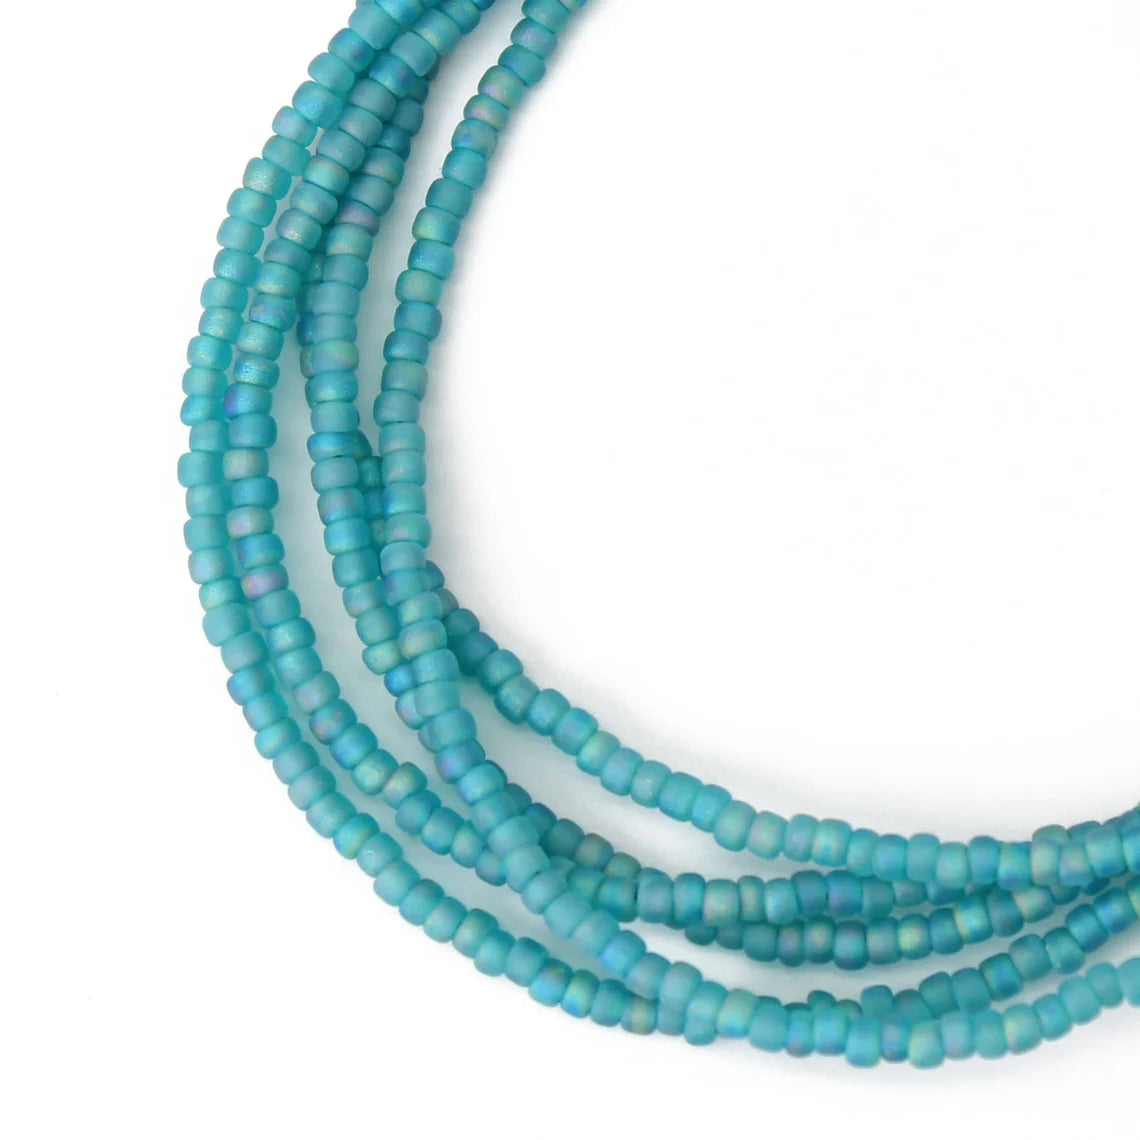 Matte Transparent Turquoise Seed Bead Necklace, Thin 1.5mm Single Strand 15